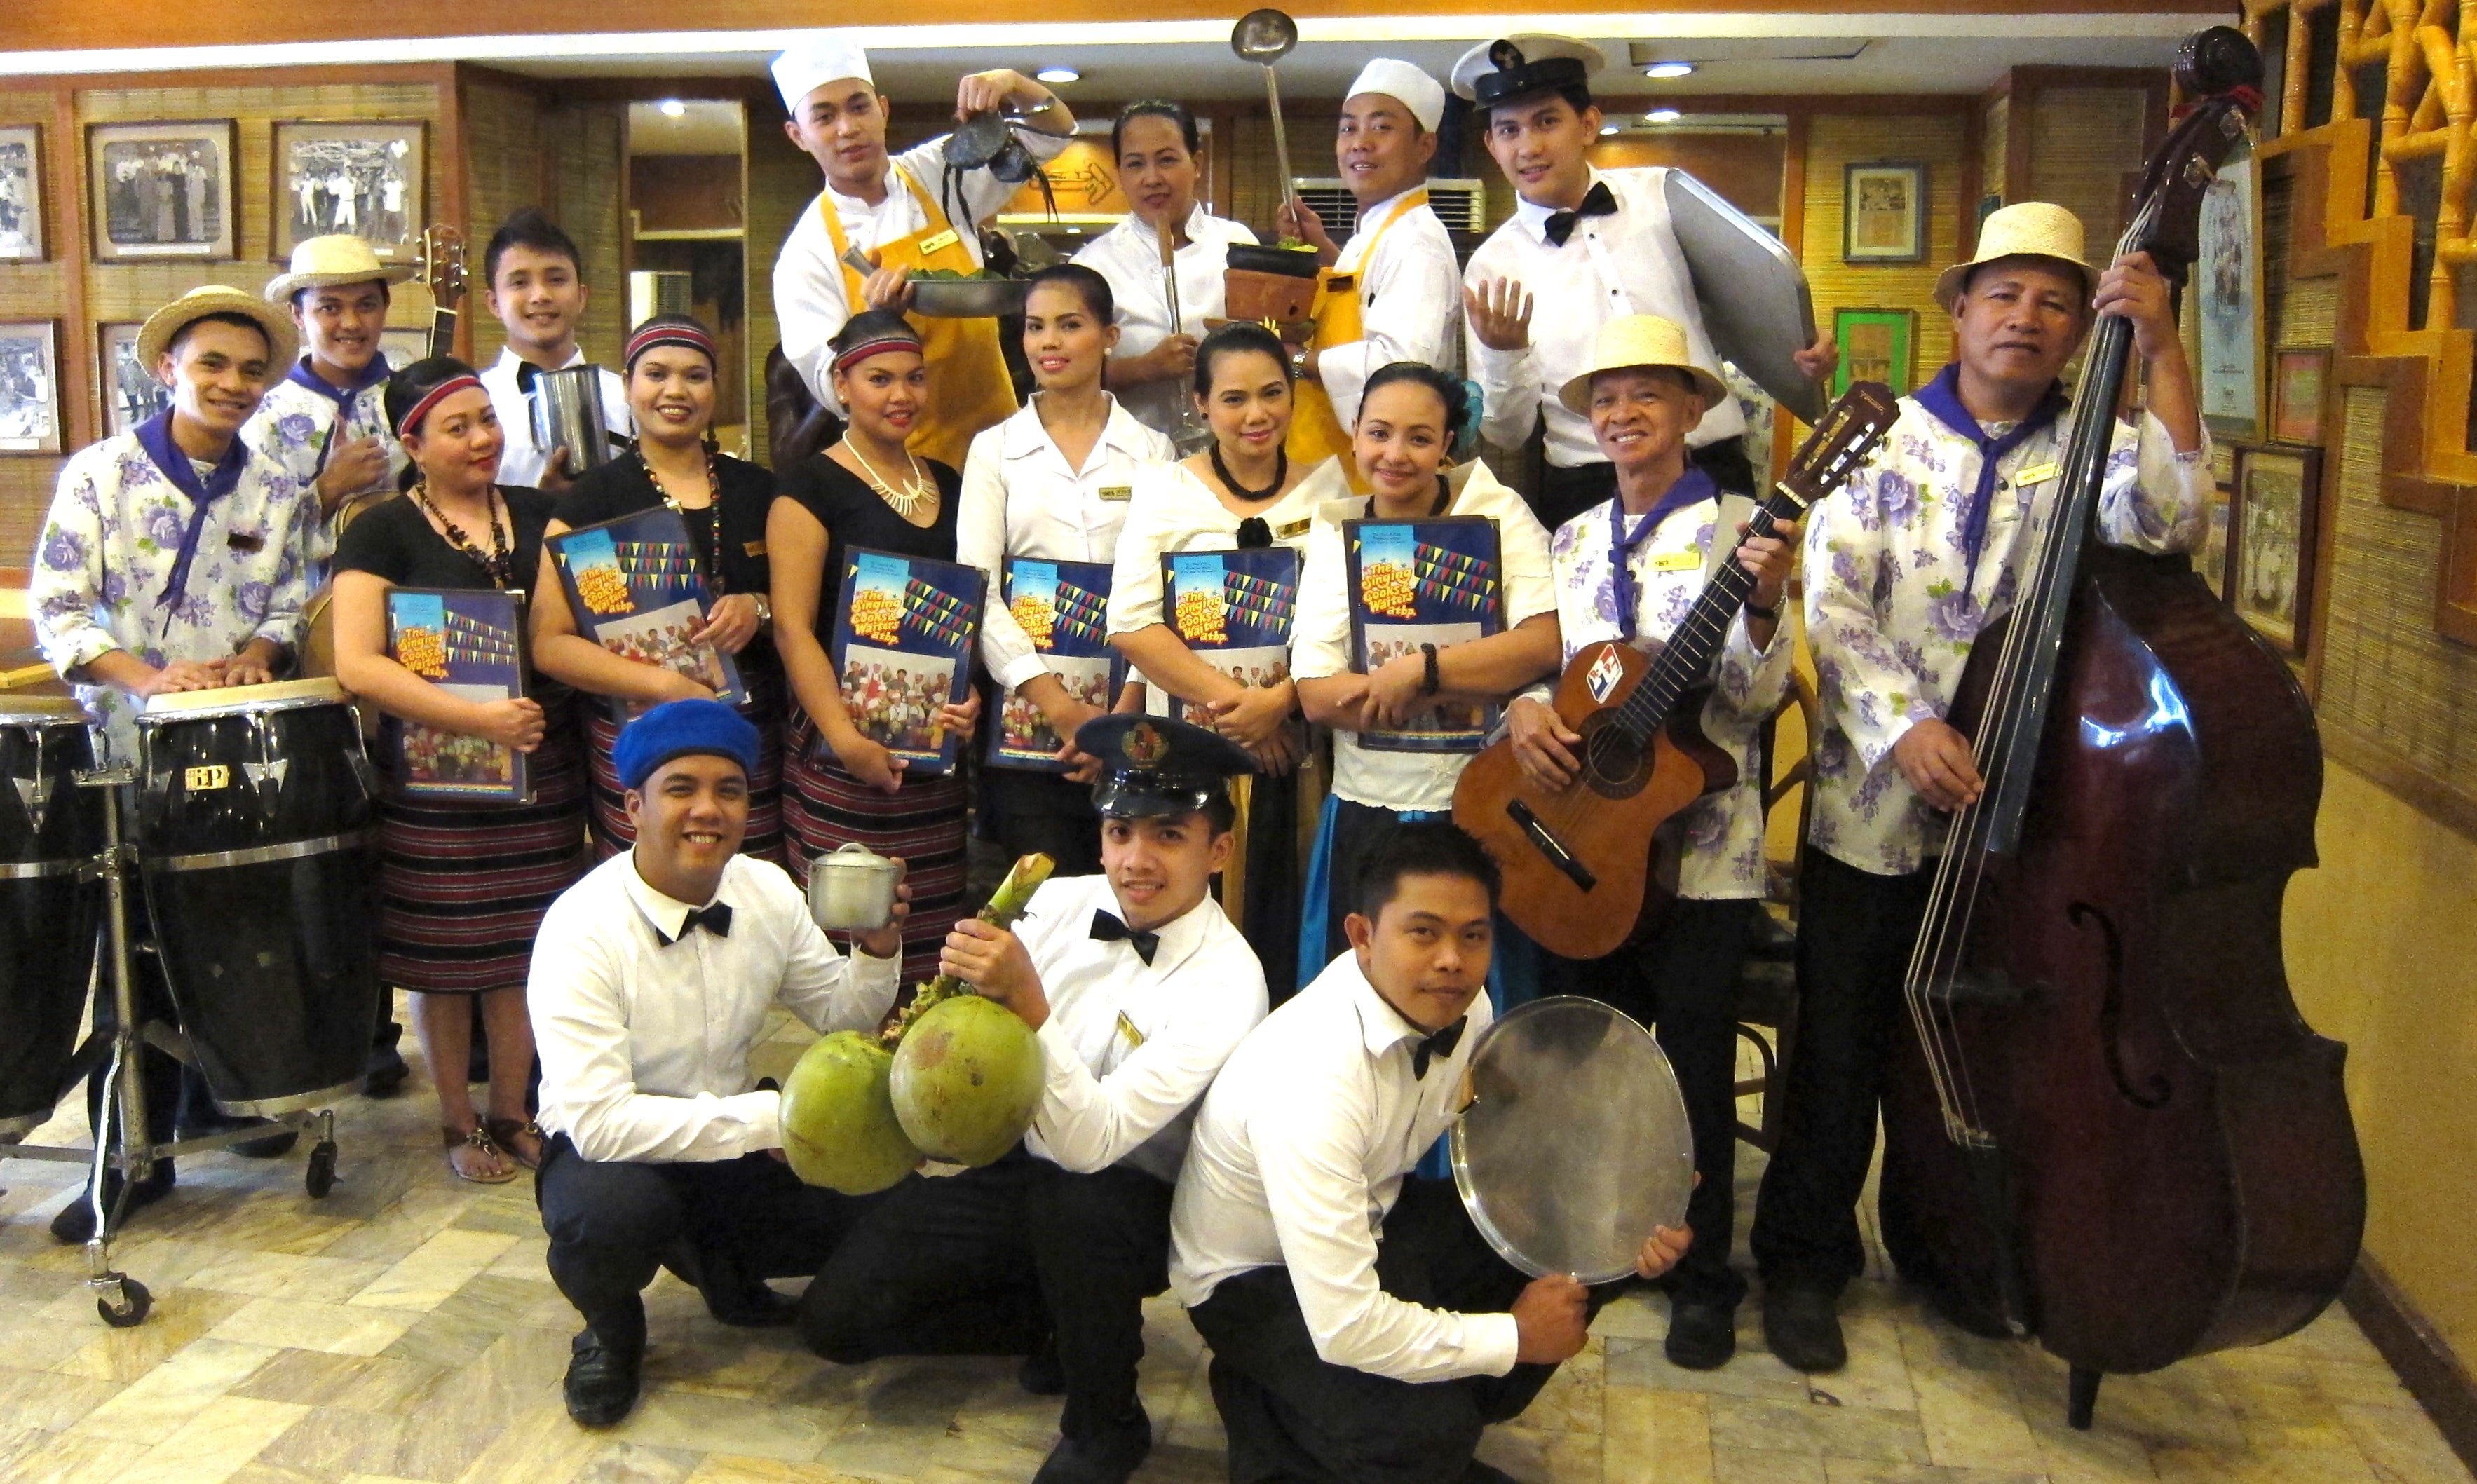 The Singing Cooks & Waiters (The Singing Cooks and Waiters Atbp)